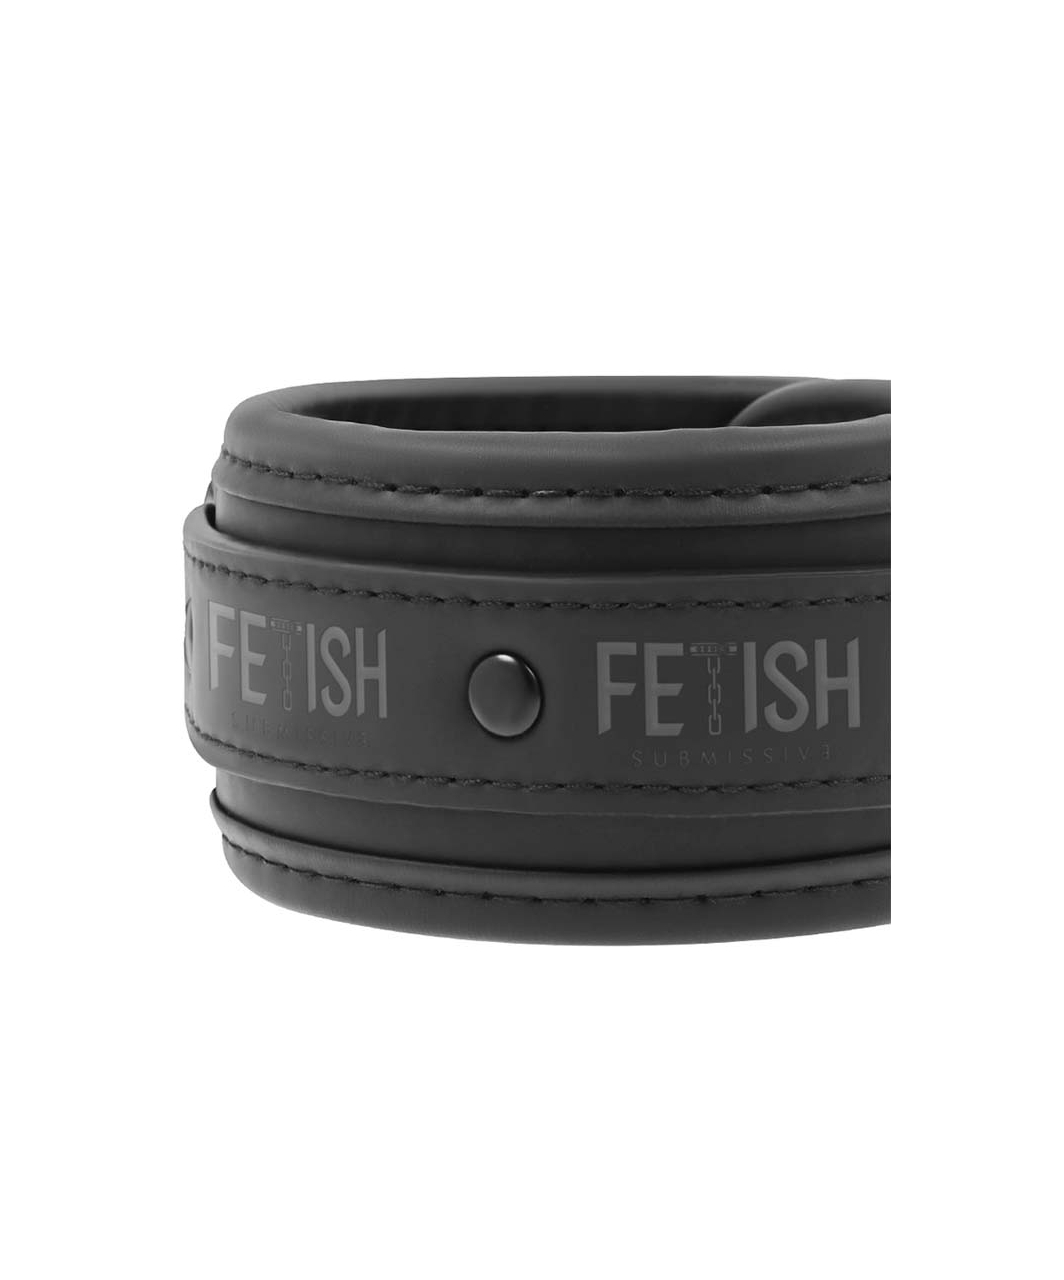 Darkness Fetish Submissive collar and wrist cuffs